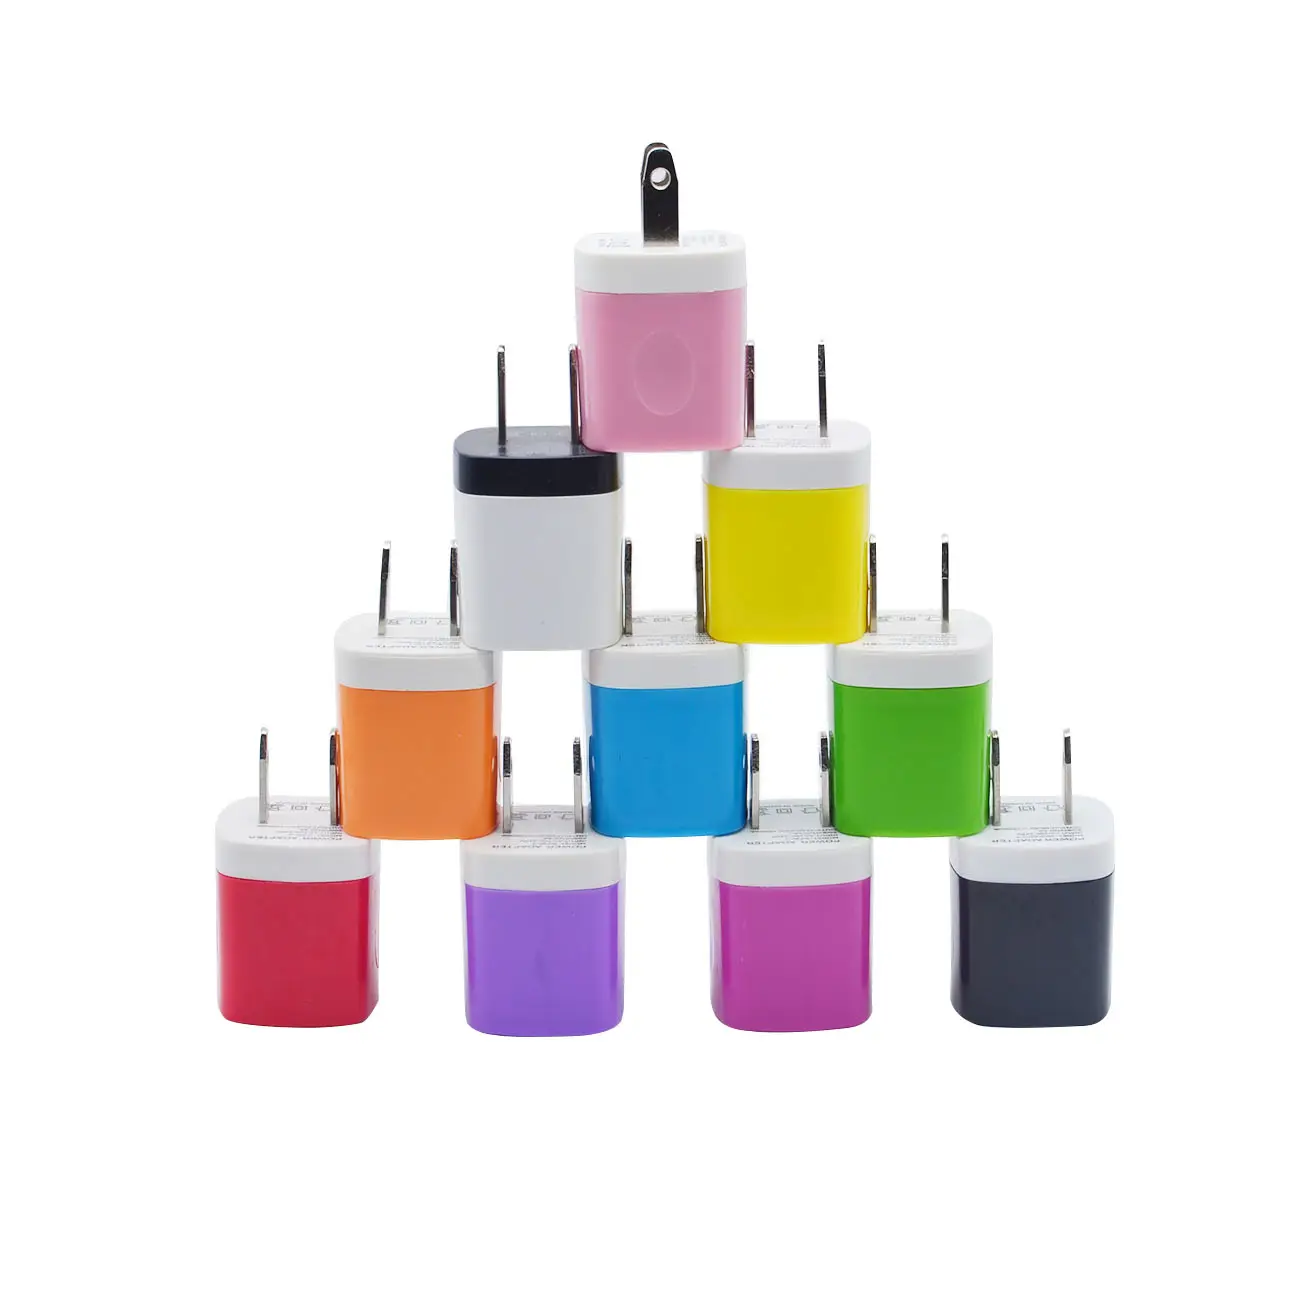 Wholesale Fast Charging Block 5W USB Wall Charger Adapter Mobile Phone Charger US Plug For iPhone Single Usb Charger